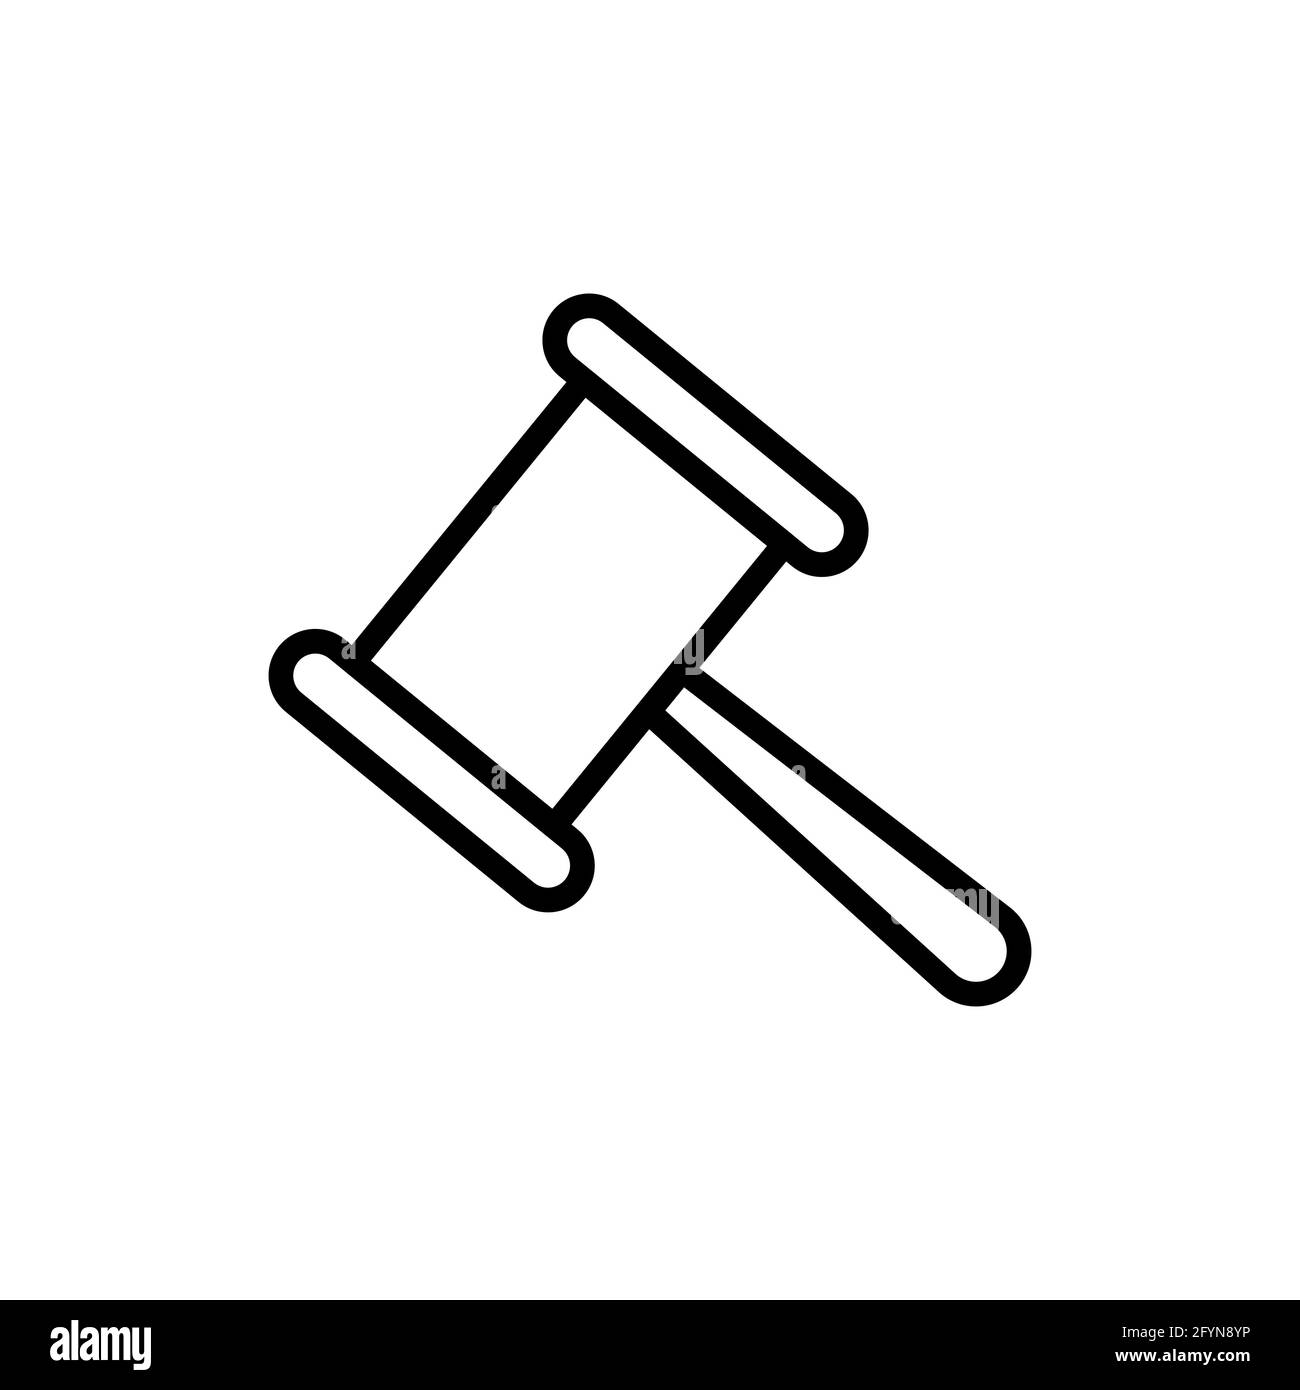 Hammer justice line icon. Law symbol. Court gavel linear illustration. Judge gavel sign. Vector isolated on white. Stock Vector